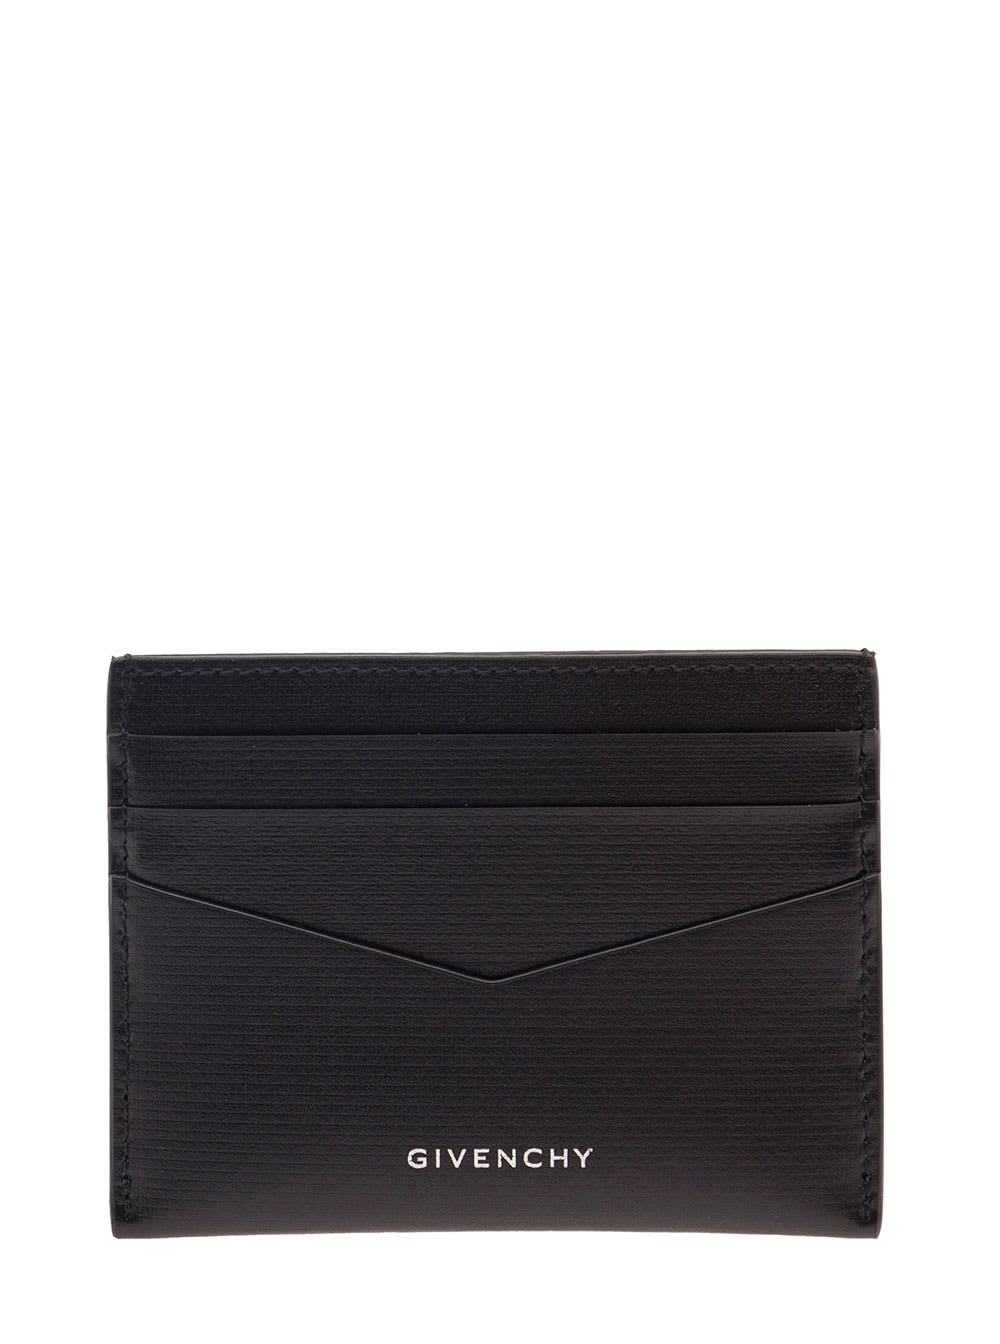 Givenchy Black Cardholder With Silver Logo Embossed At The Front In Leather Man